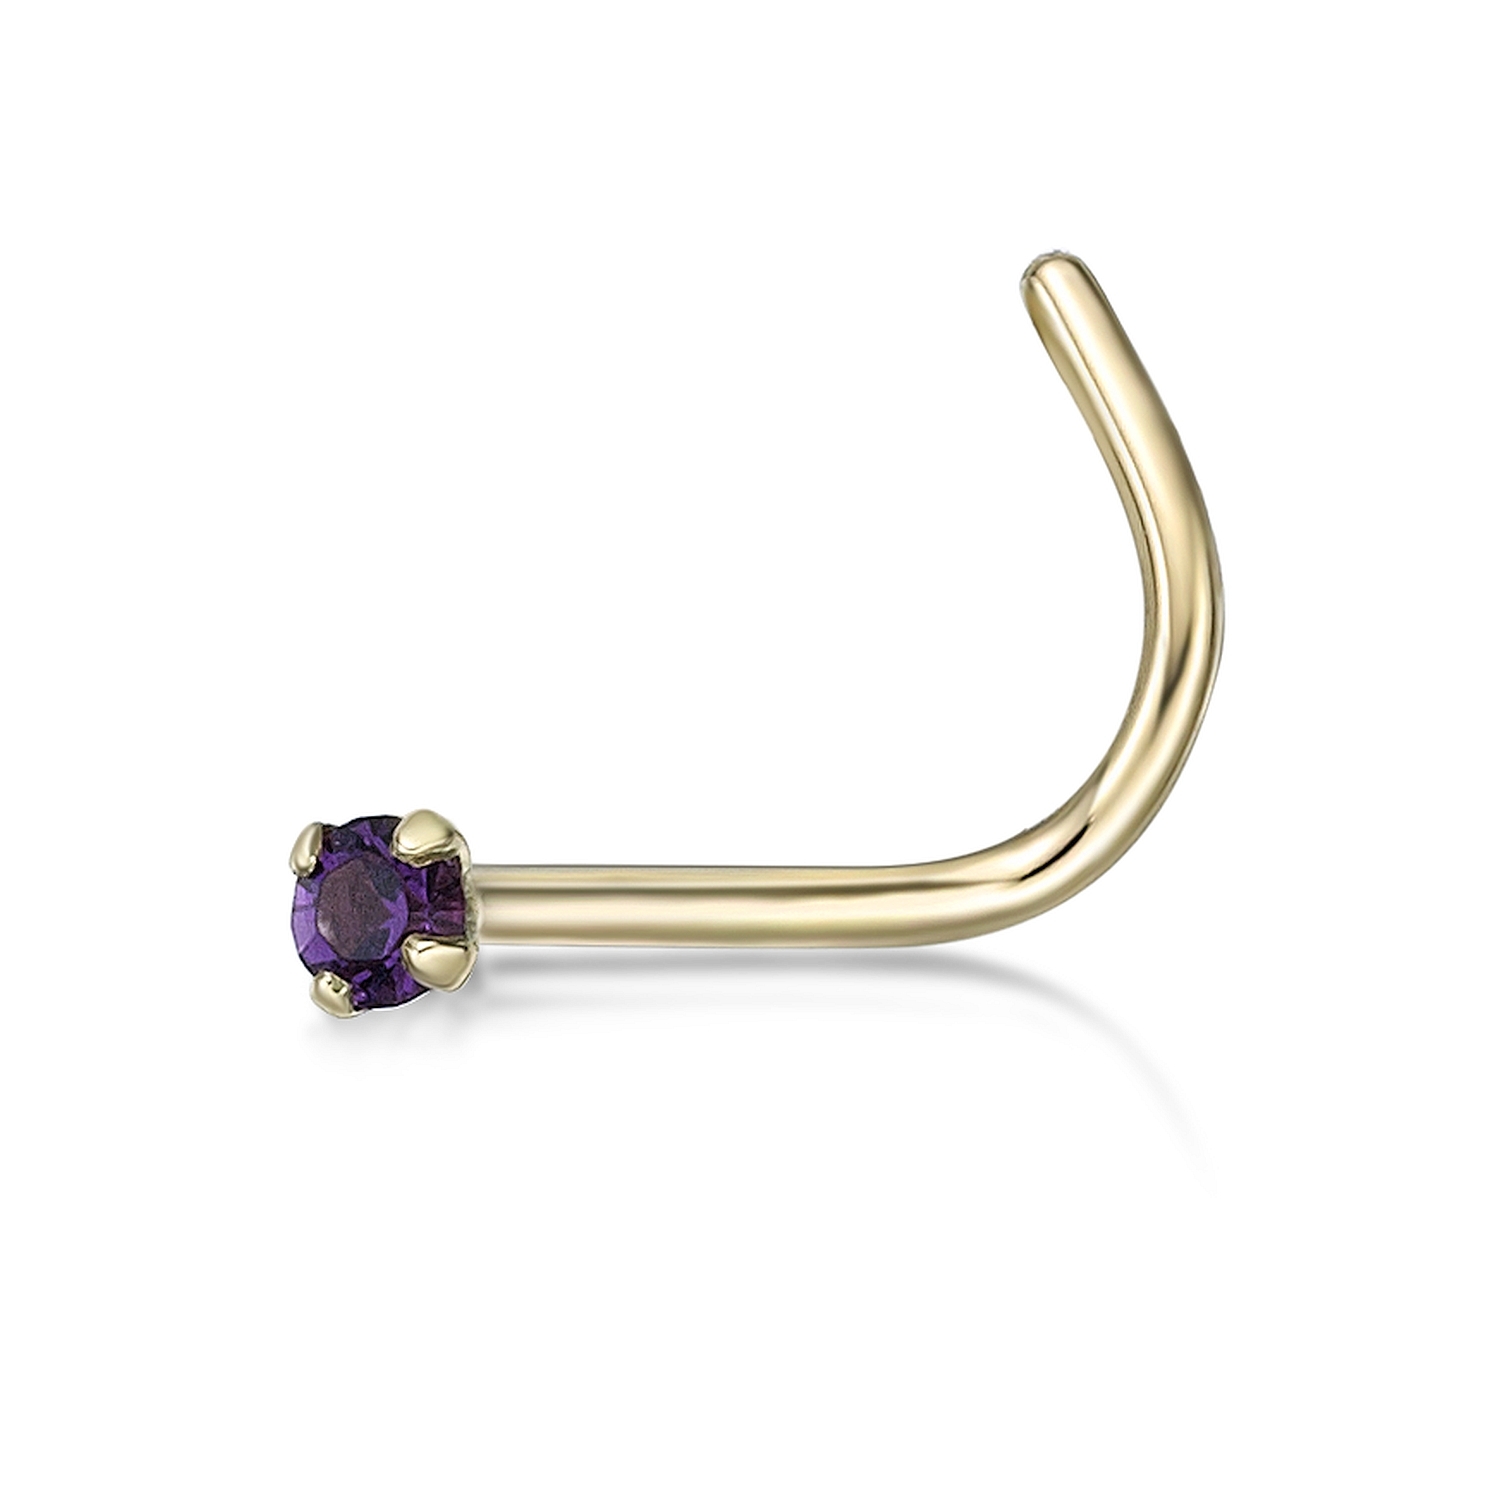 Lavari Jewelers Women's Violet Cubic Zirconia Curved Stud Nose Ring, 14K Yellow Gold, 20 Gauge, 2 MM